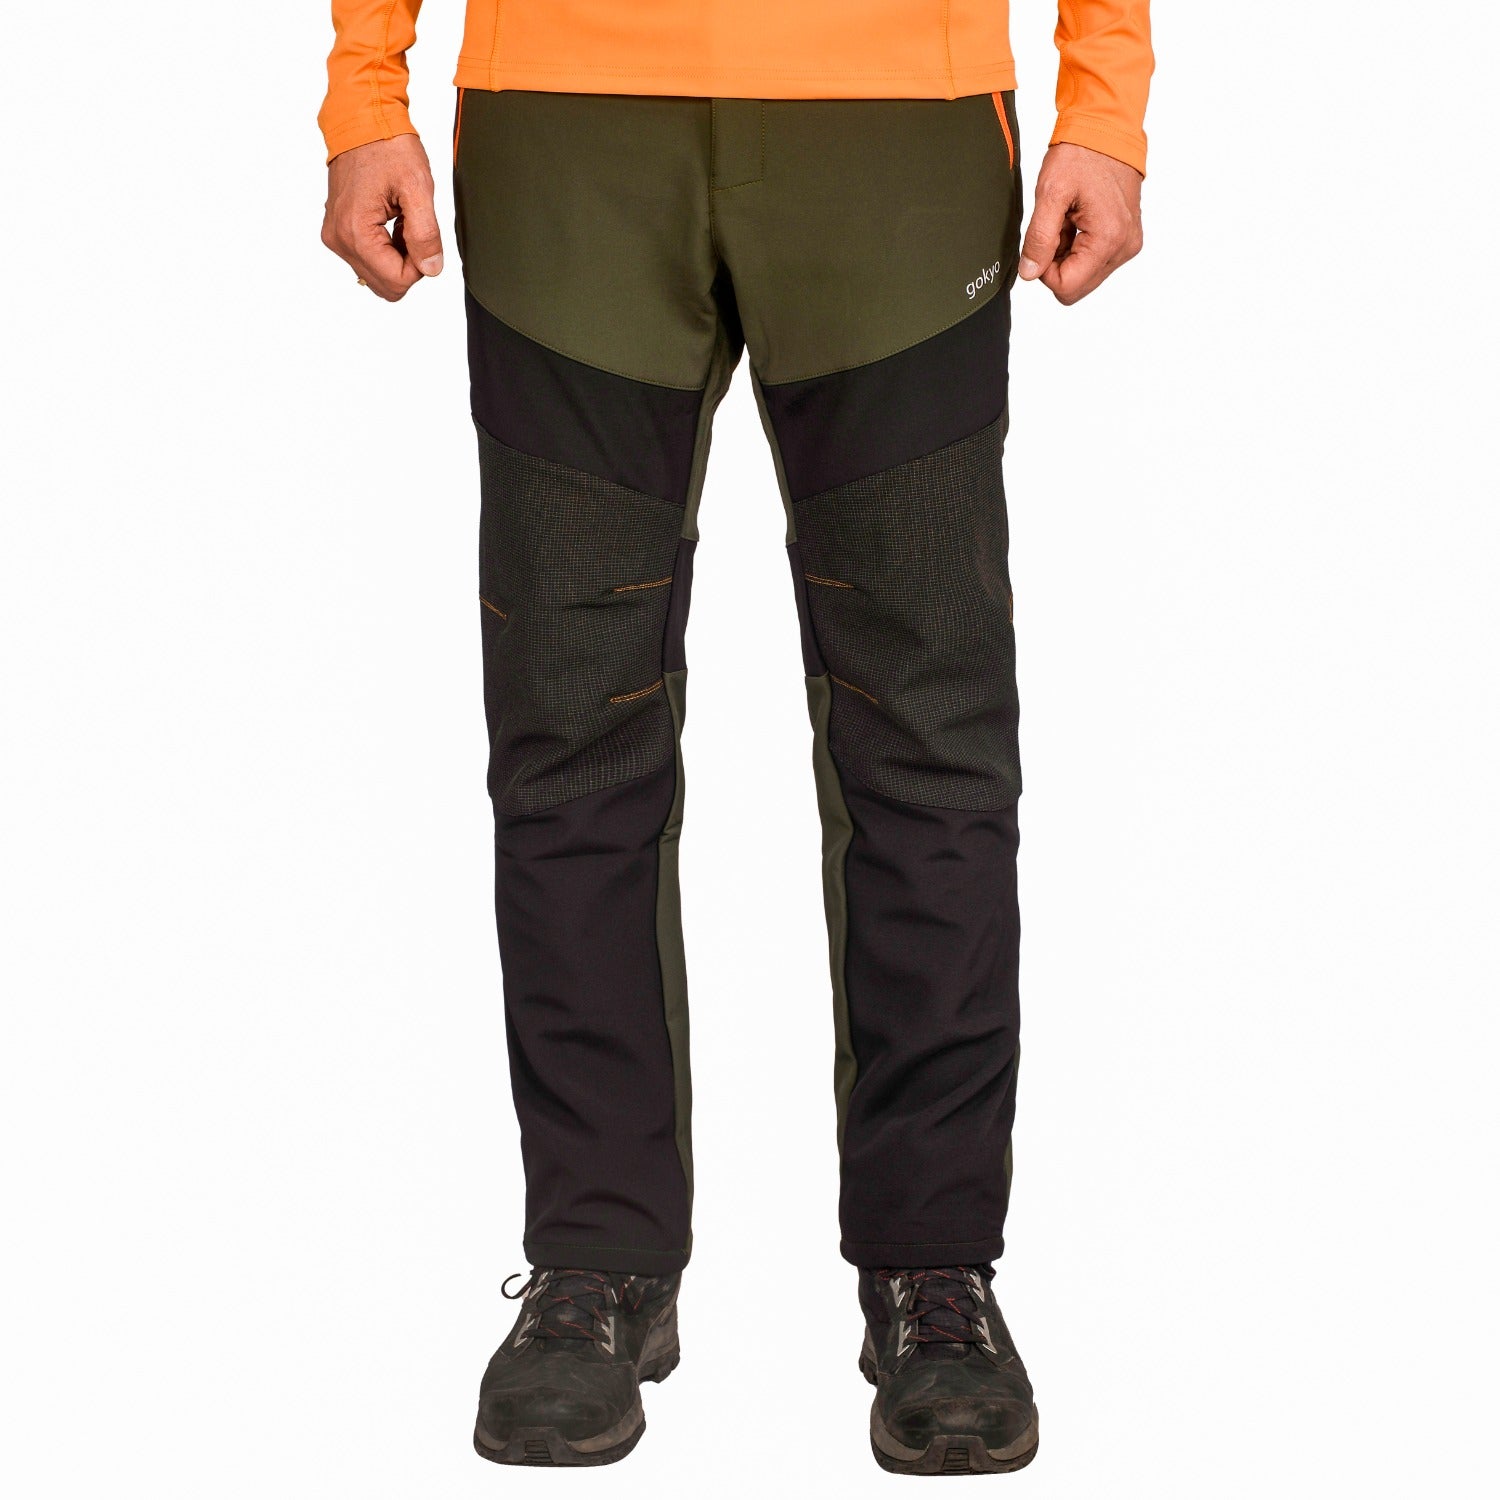 Buy K2 Cold Weather Trekking & Outdoor Pants Olive at Gokyo Outdoor Clothing & Gear